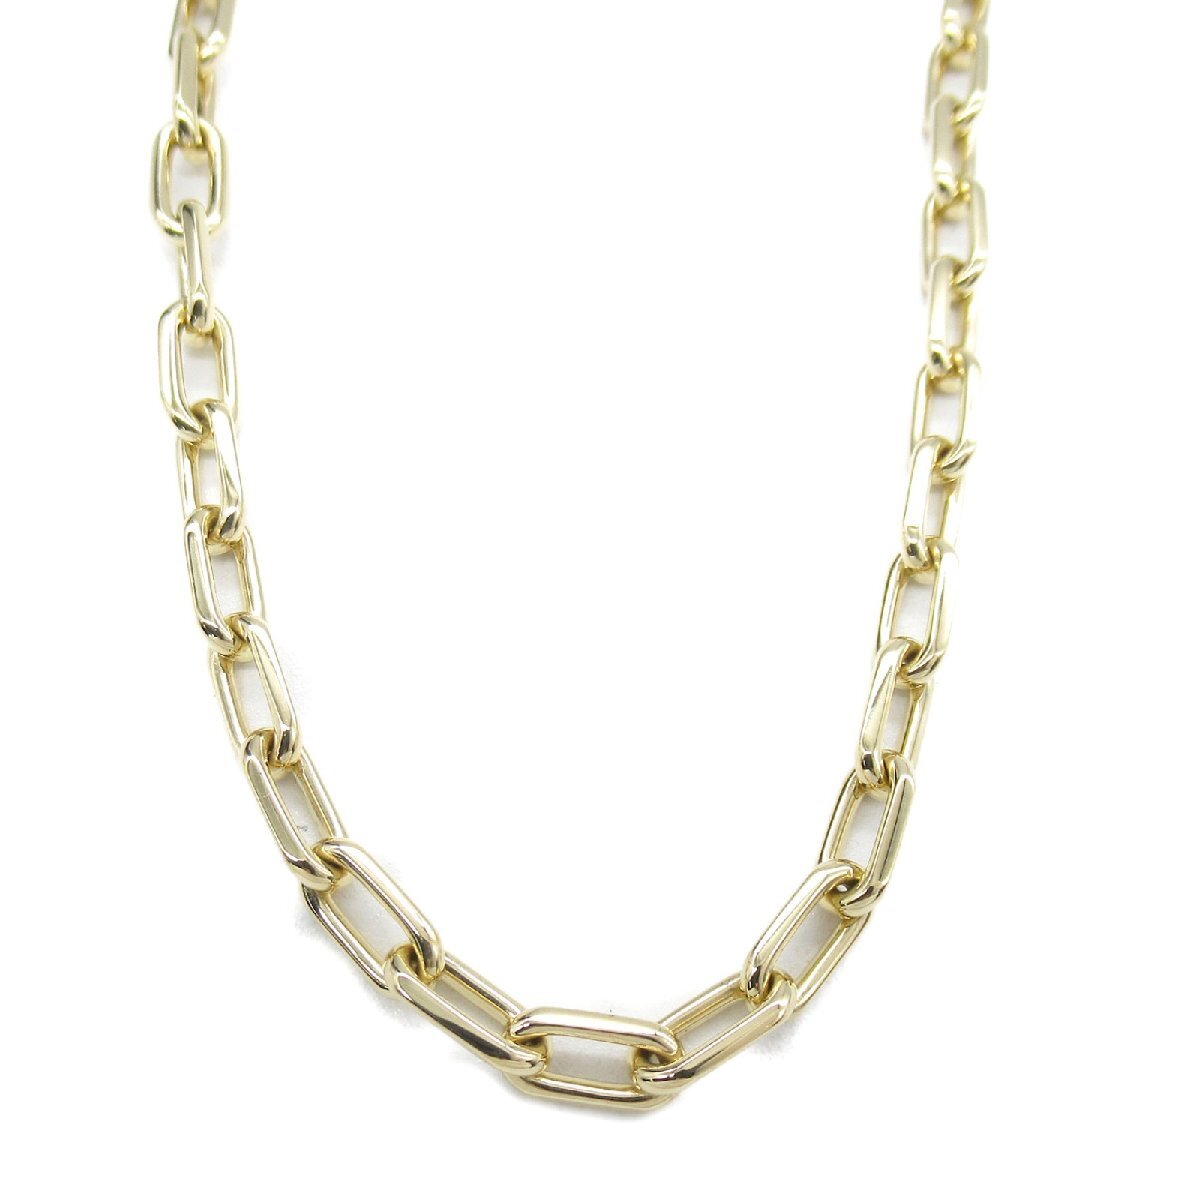  Cartier s Pal ta rental design necklace brand off CARTIER K18( yellow gold ) necklace 750YG used lady's 